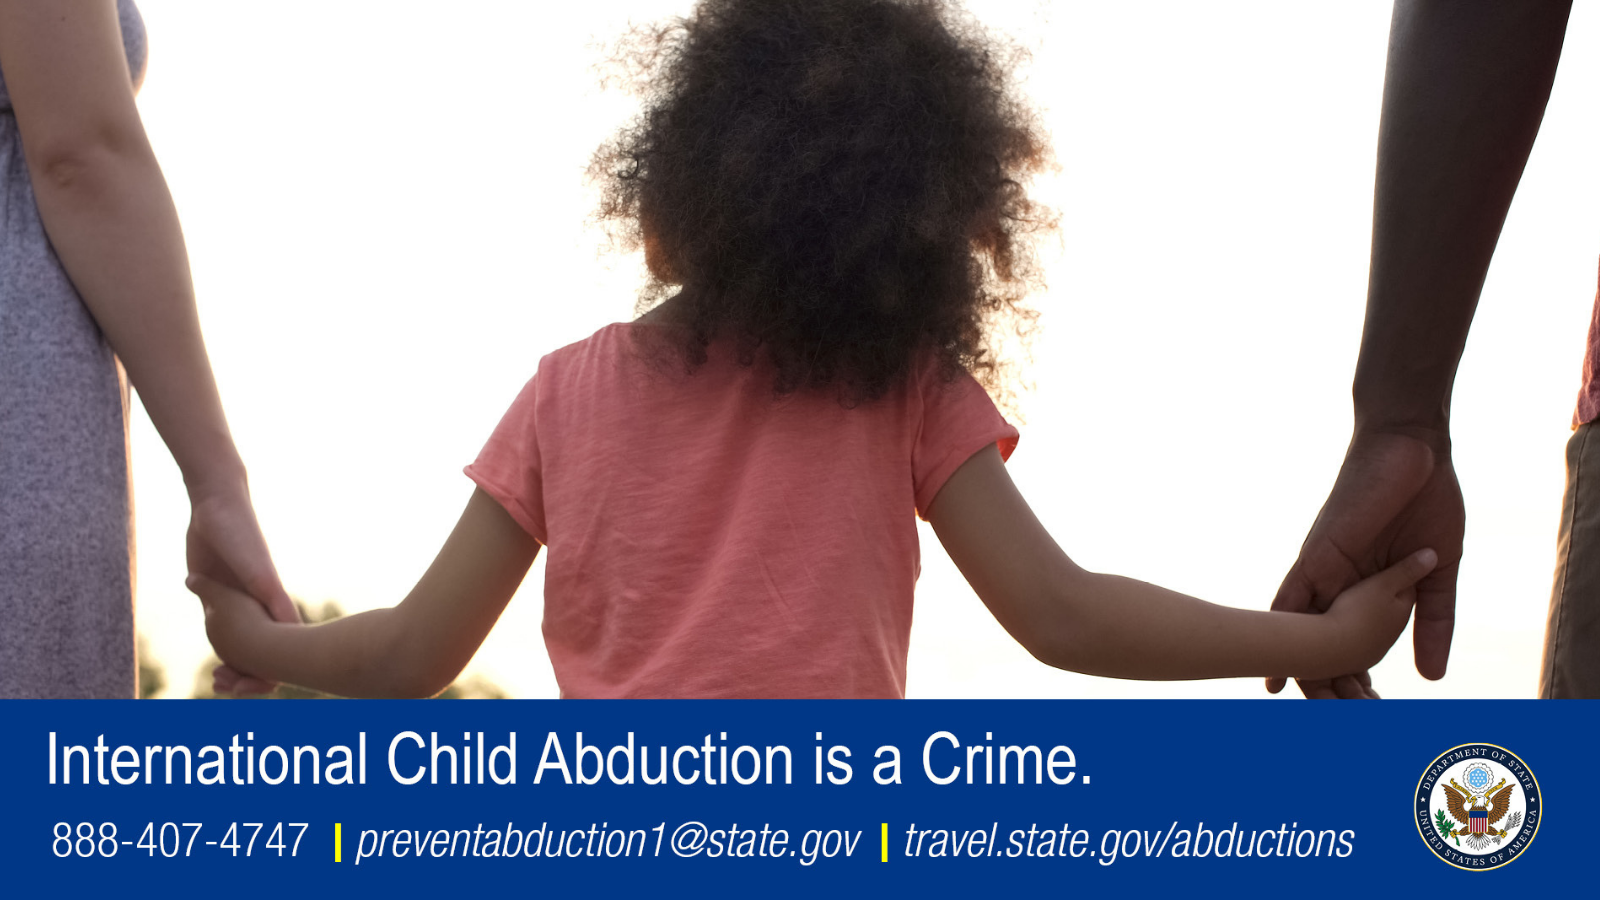 International Child Abduction is a Crime